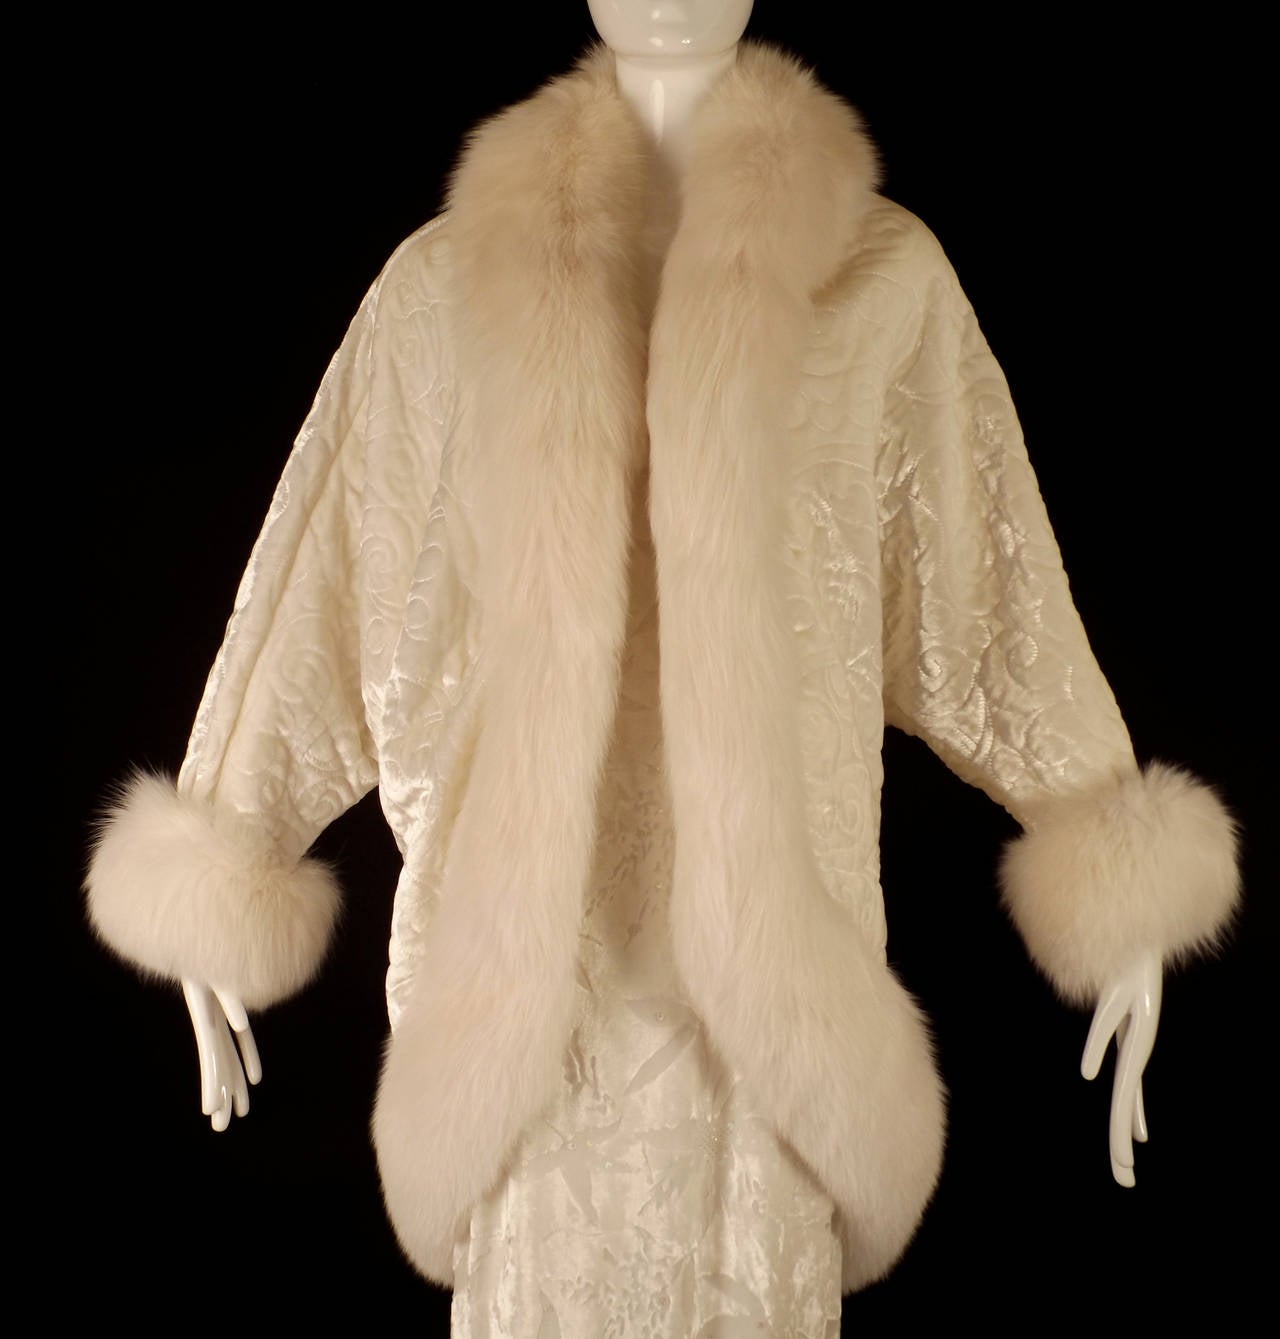 Fantastic cocoon evening coat very reminiscent of the 1920s in white quilted velvet and trimmed in white fox fur.  The coat has a scrolling pattern in the quilting and it's lined in white silk crepe back satin. The coat is trimmed in the most